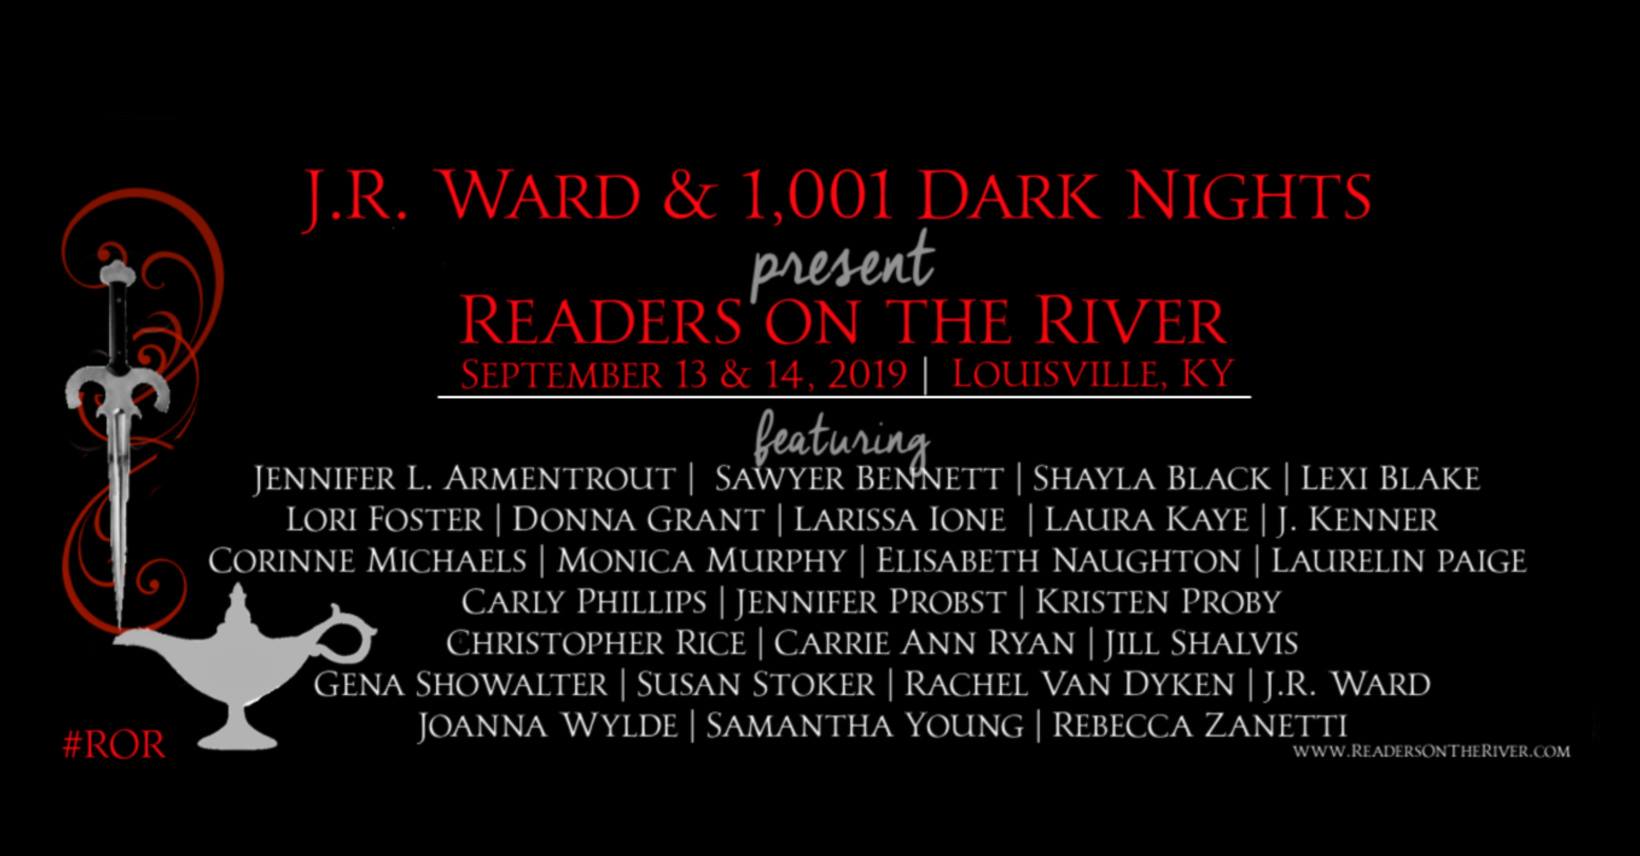 Readers on the River with JR Ward and 1001 Dark Nights Rebecca